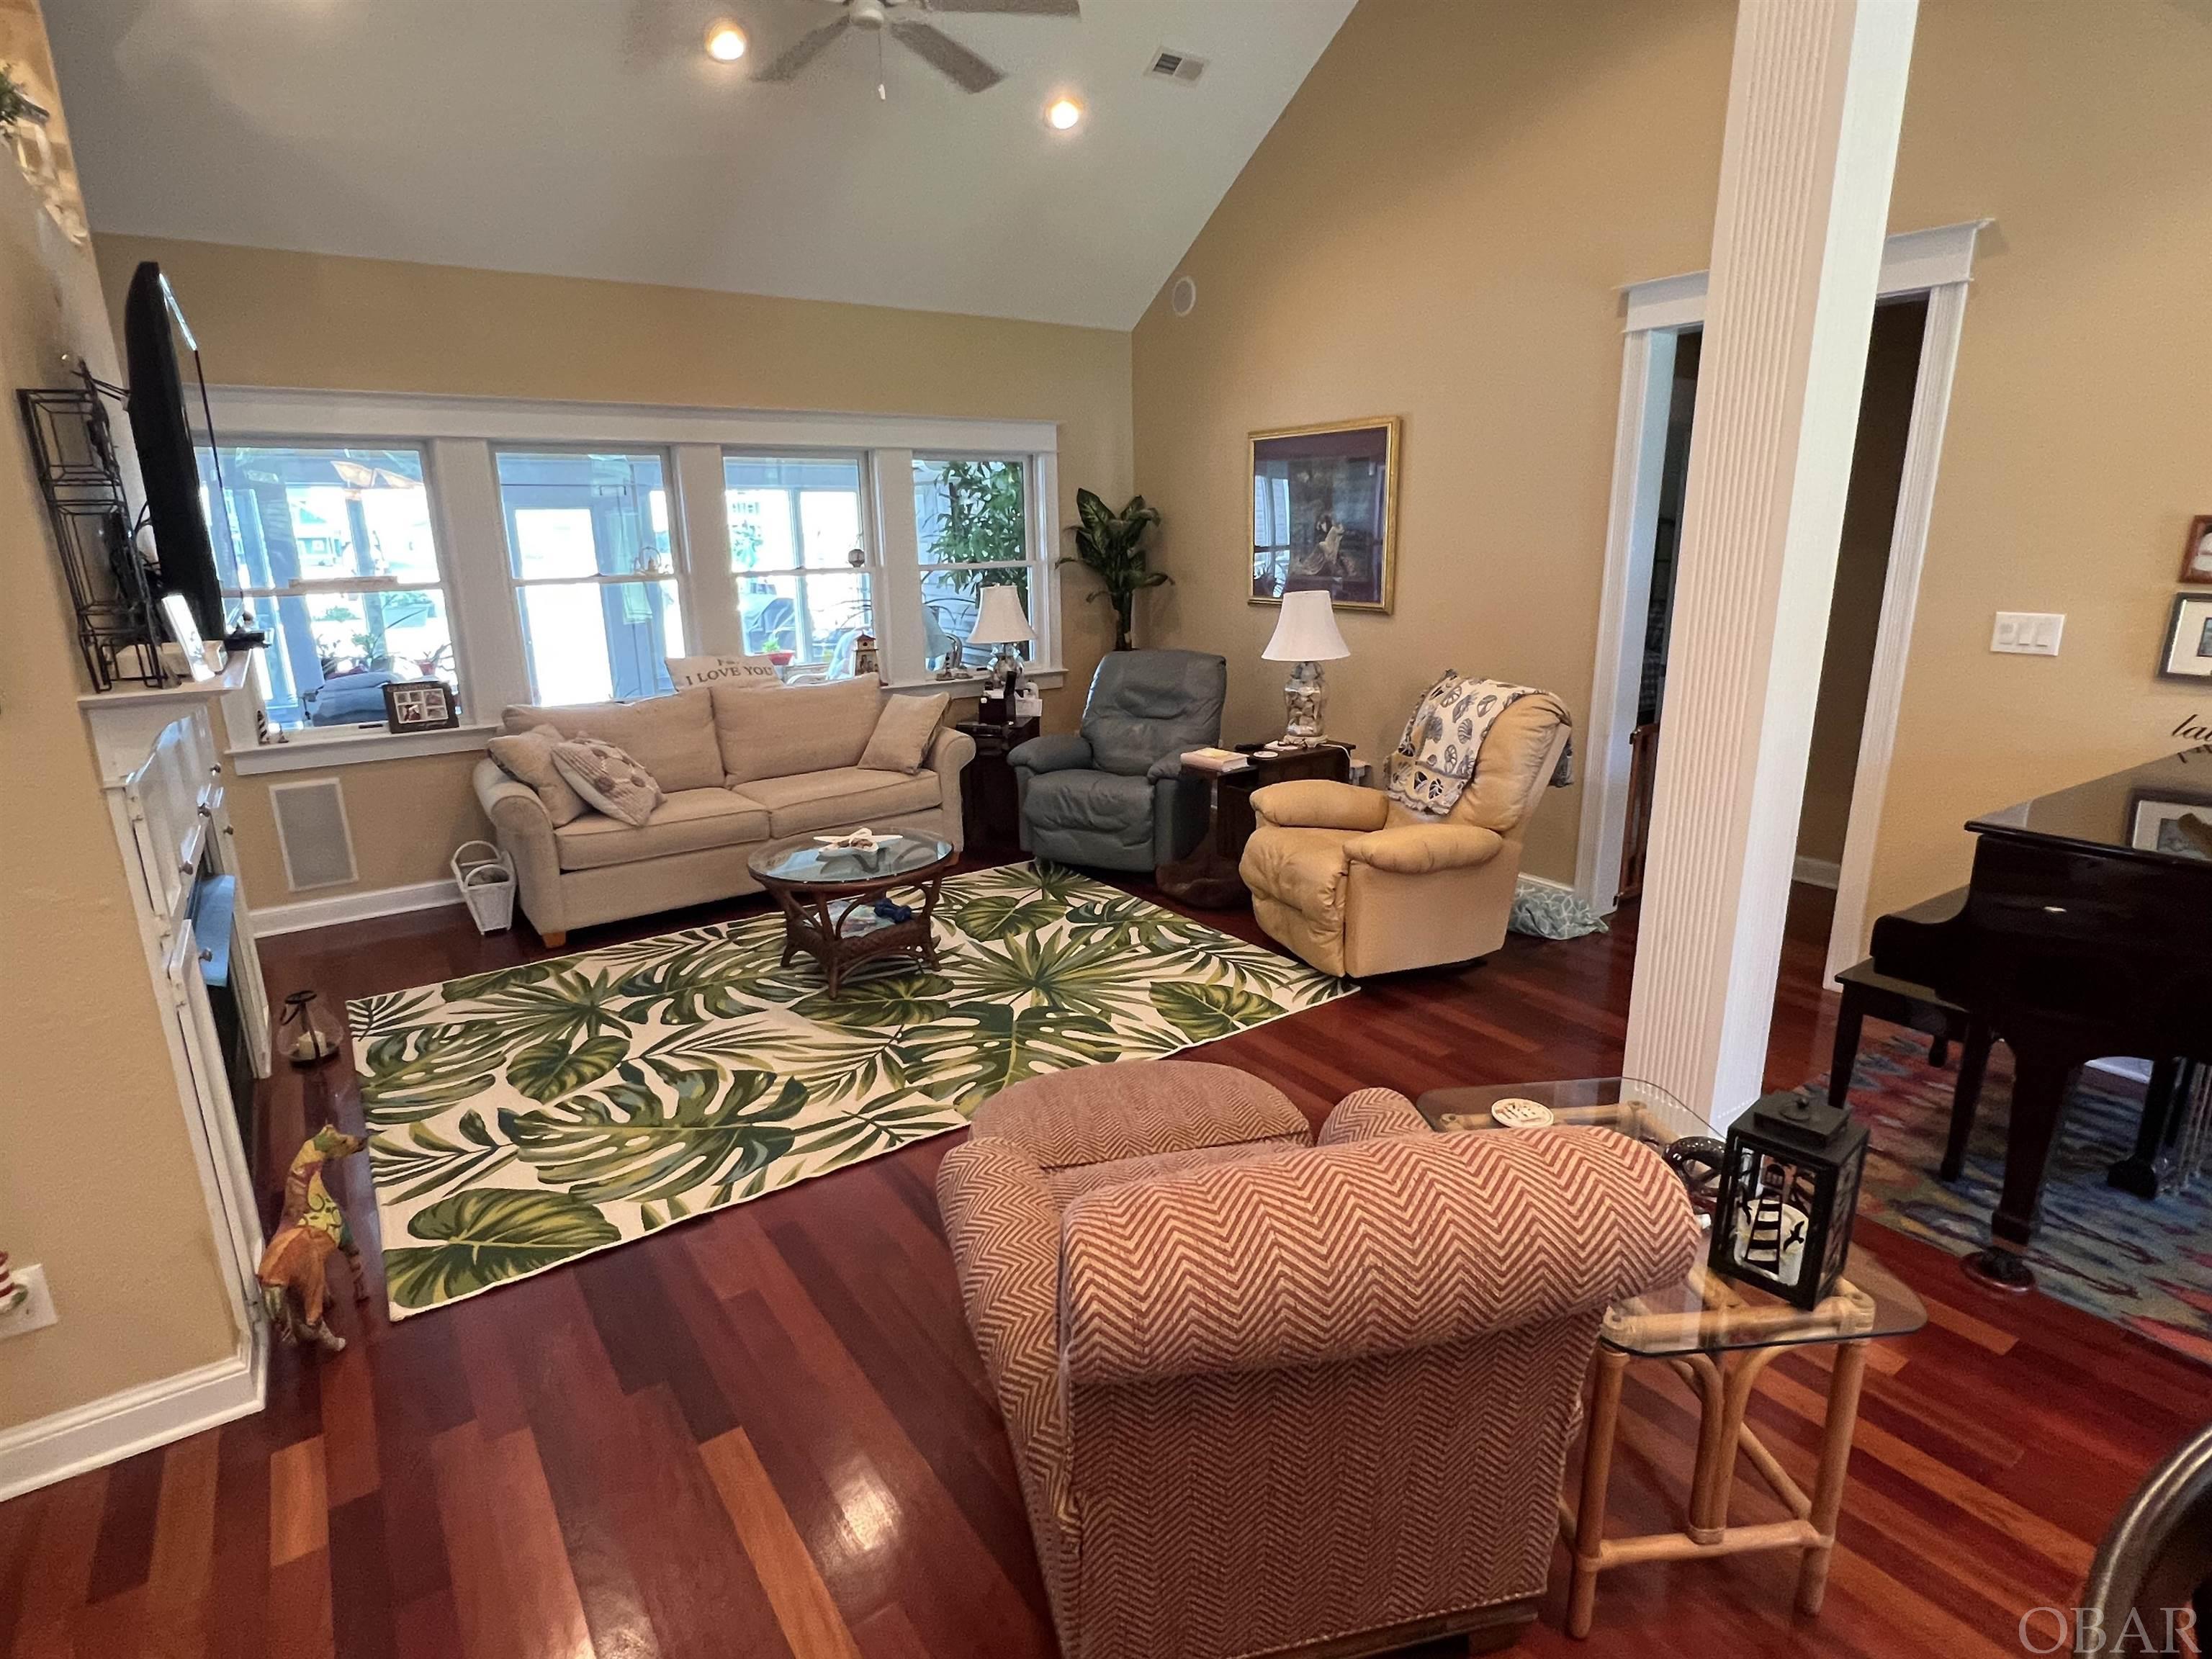 133 Weir Point Drive, Manteo, NC 27954, 4 Bedrooms Bedrooms, ,3 BathroomsBathrooms,Residential,For Sale,Weir Point Drive,119932